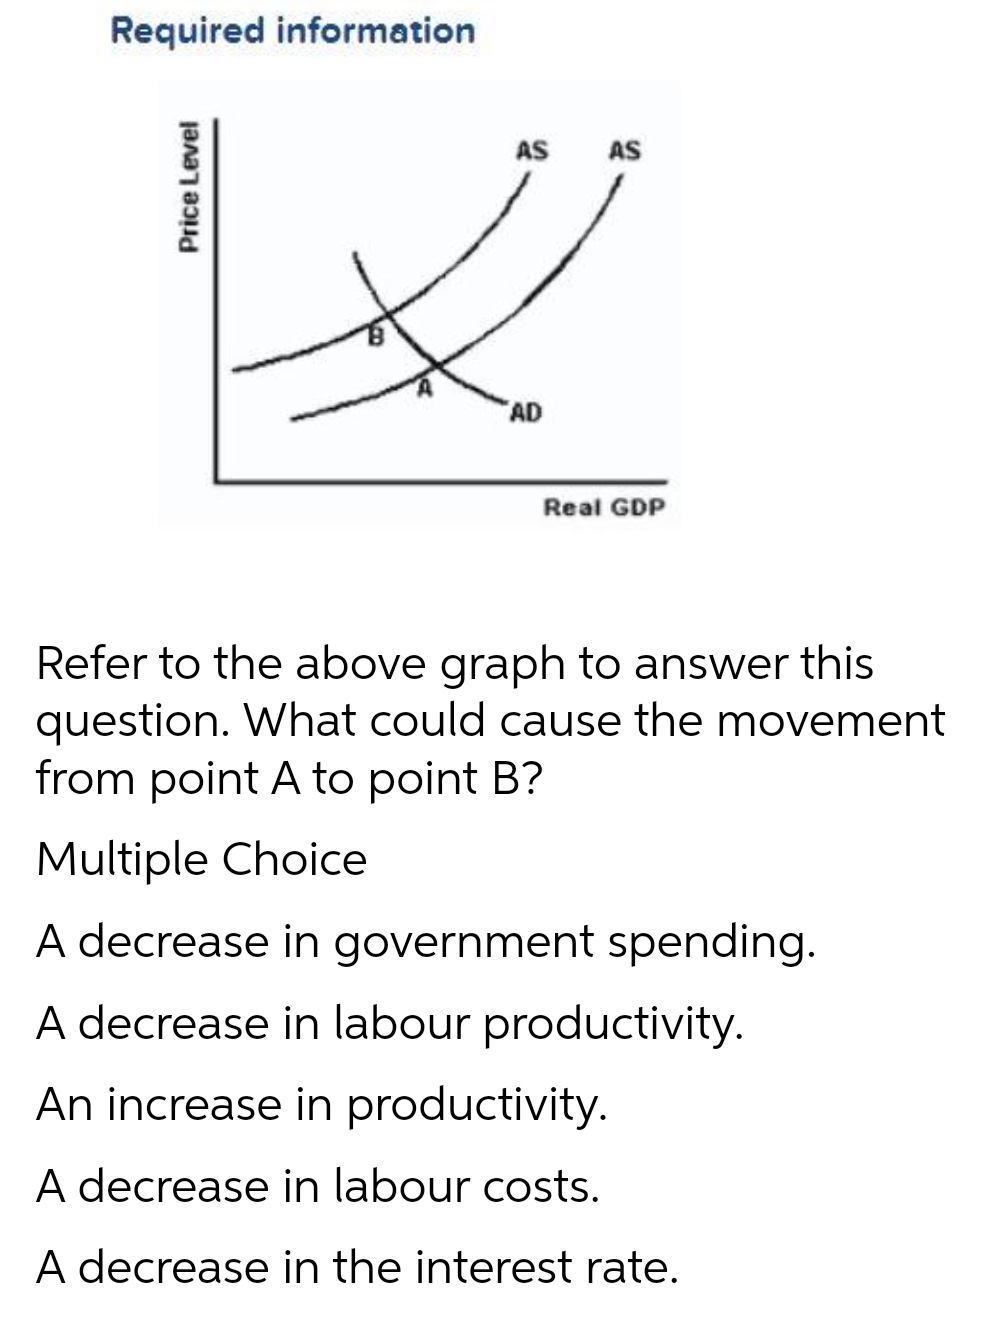 Required information
AS
AS
AD
Real GDP
Refer to the above graph to answer this
question. What could cause the movement
from point A to point B?
Multiple Choice
A decrease in government spending.
A decrease in labour productivity.
An increase in productivity.
A decrease in labour costs.
A decrease in the interest rate.
Price Level
